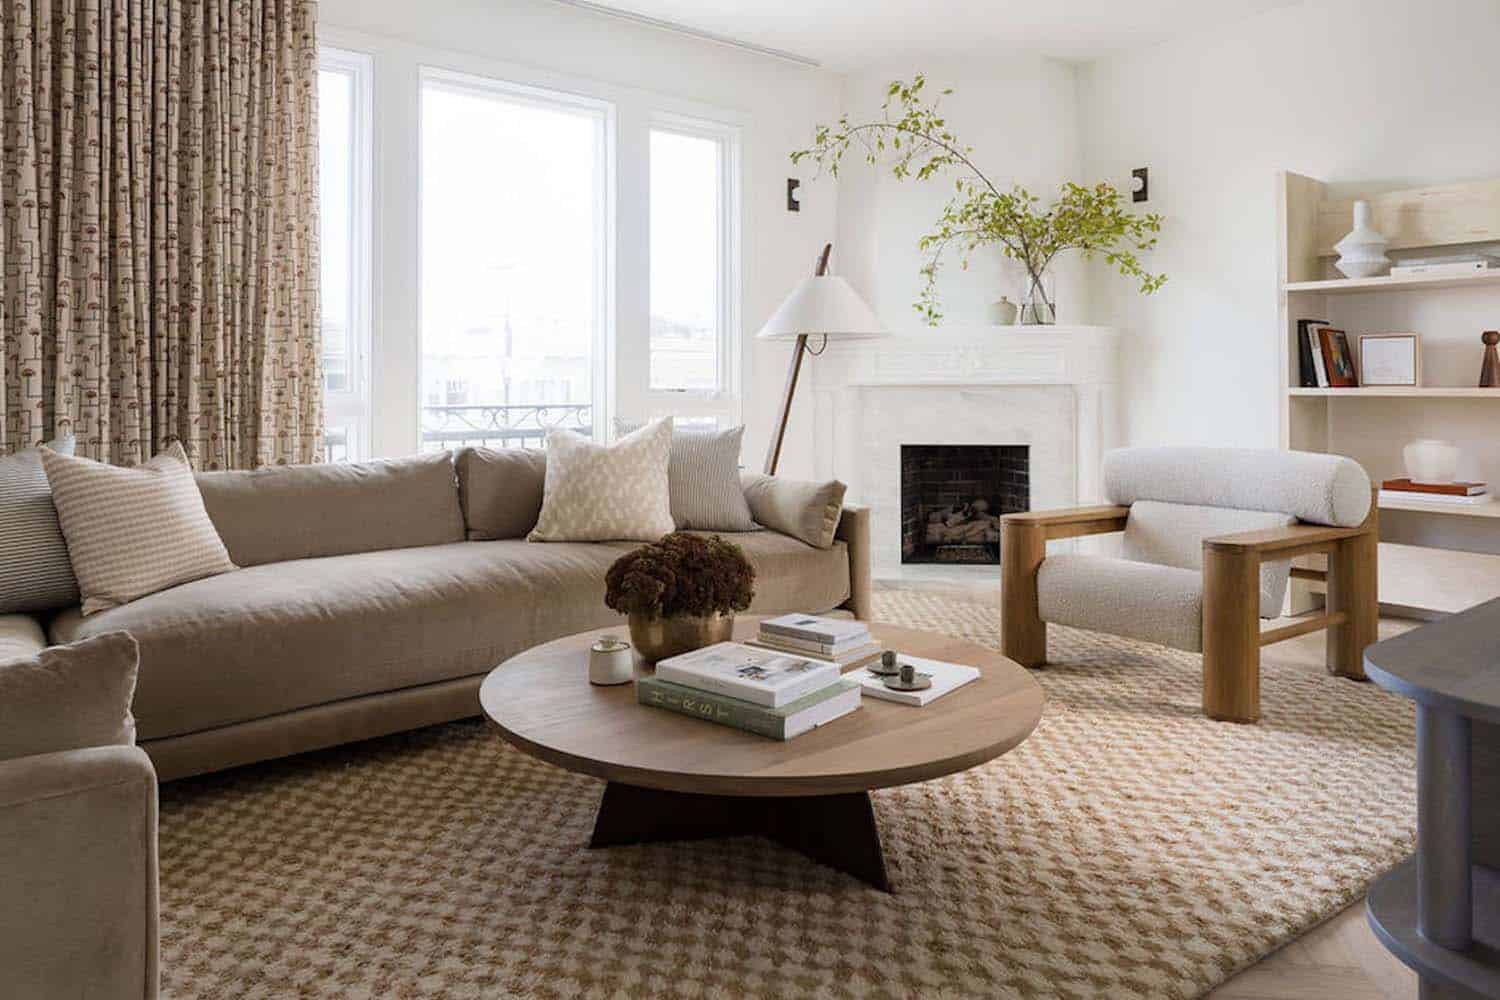 Step into a beautifully renovated house with beach chic vibes in San Francisco